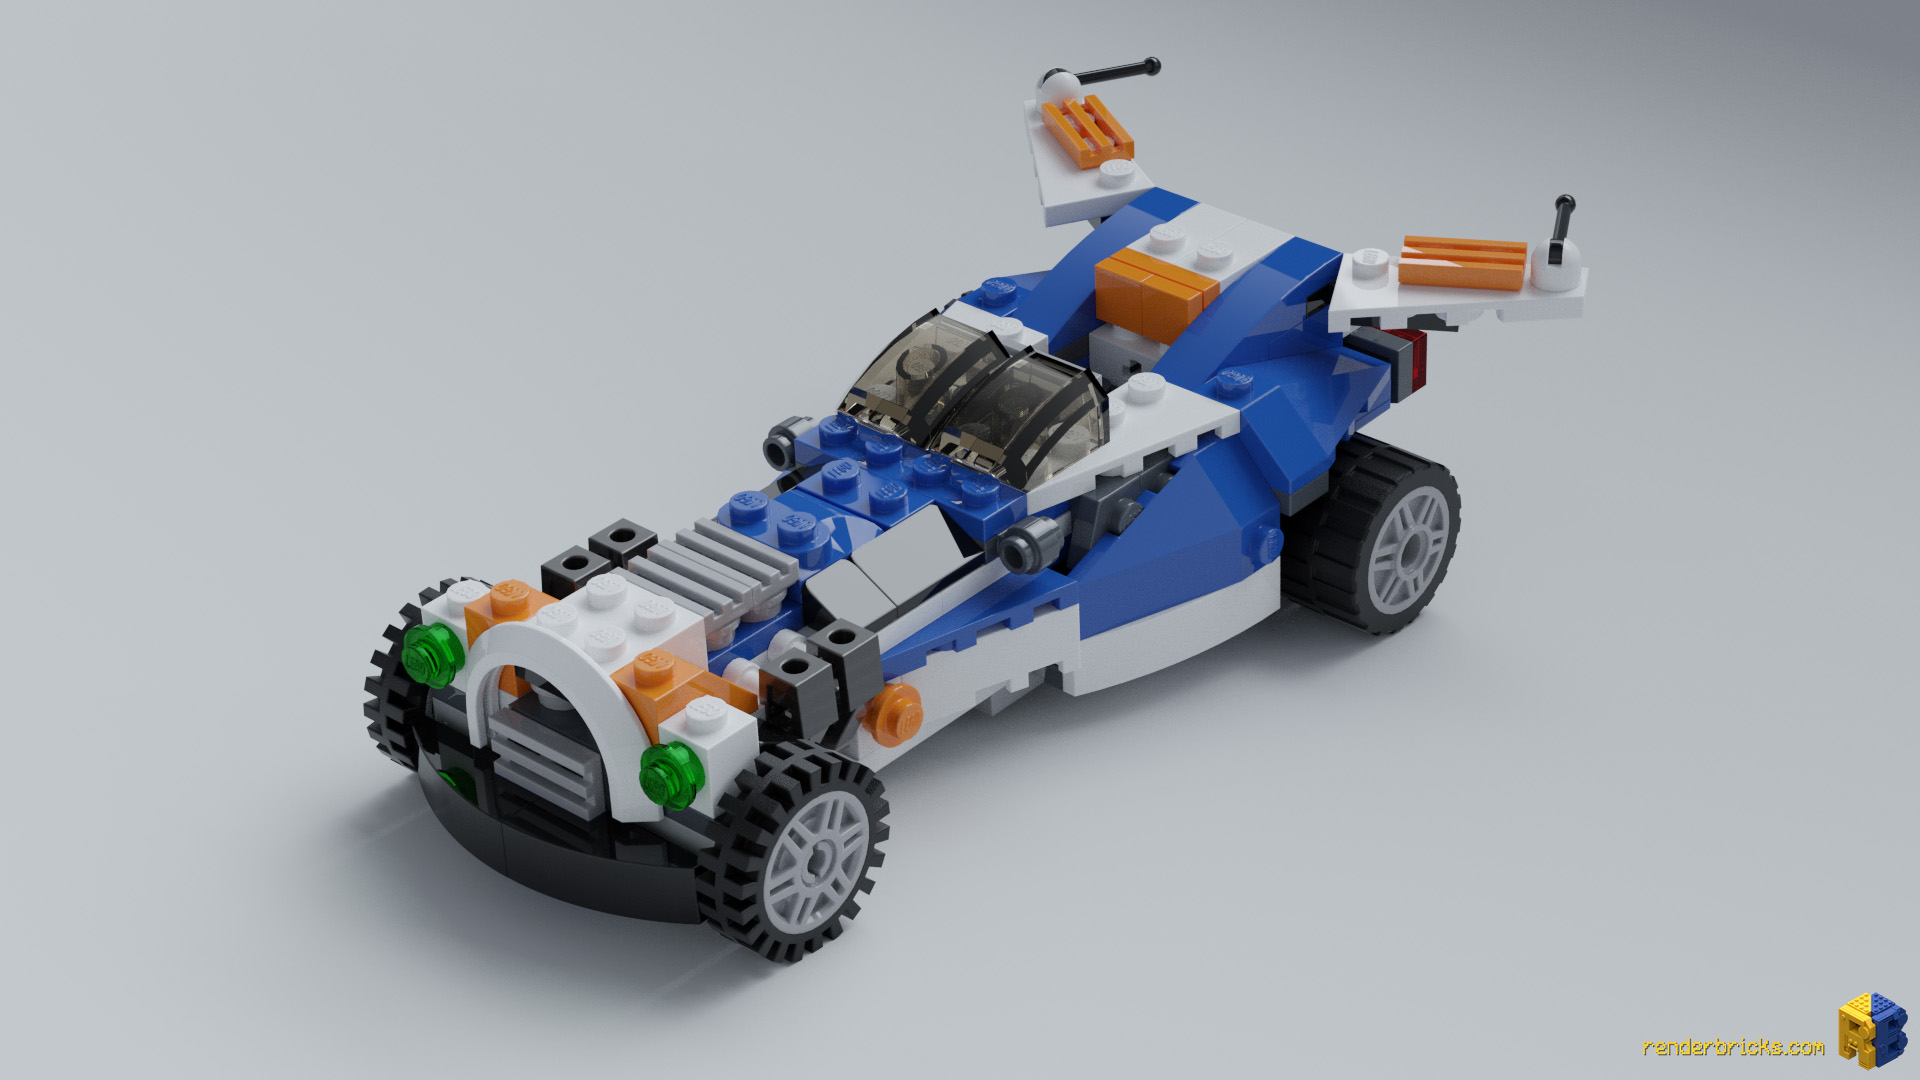 Rendering LEGO - Finished Projects - Blender Community